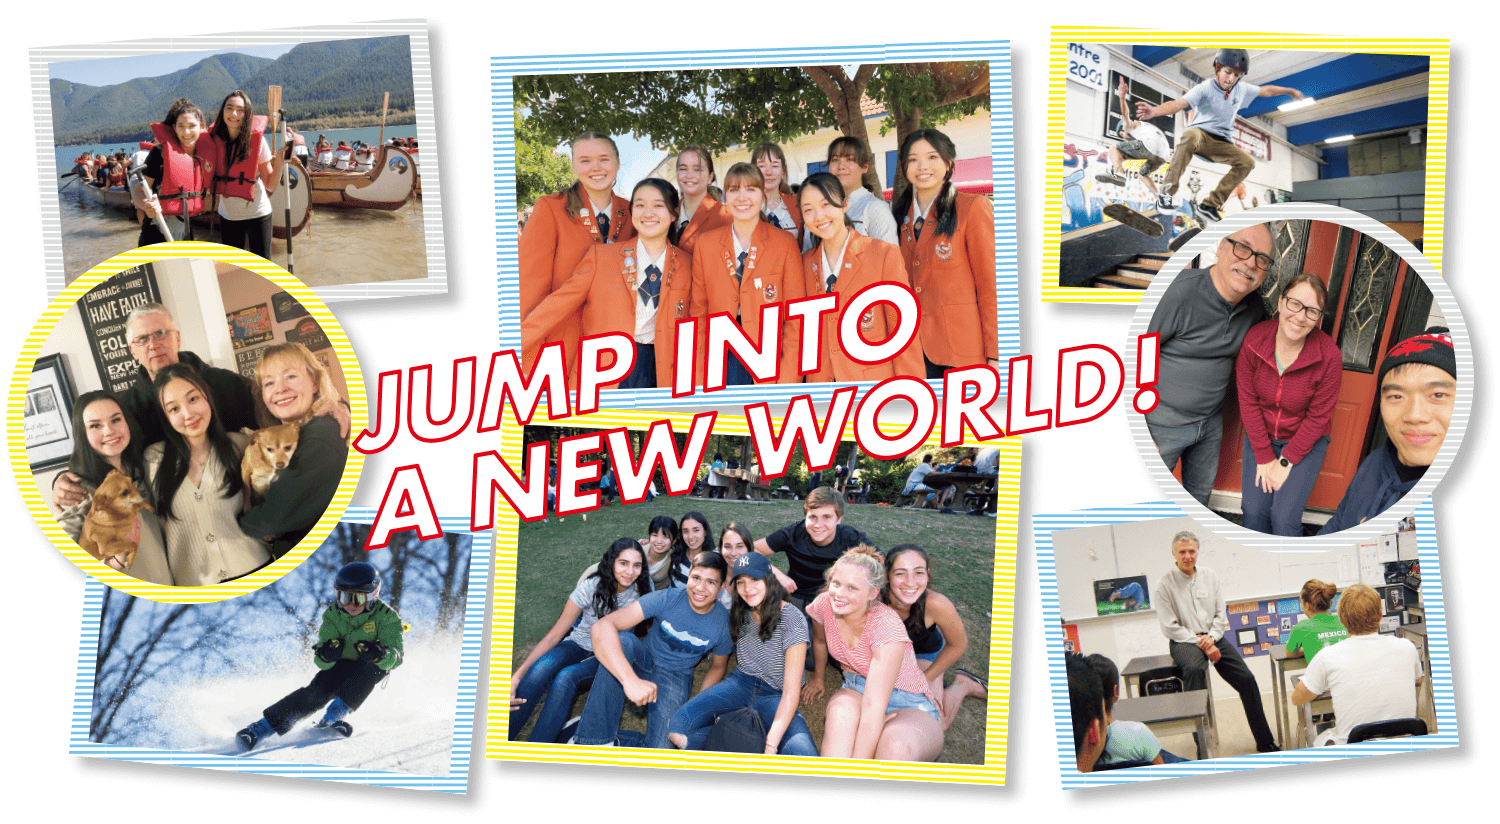 JUMP INTO A NEW WORLD!